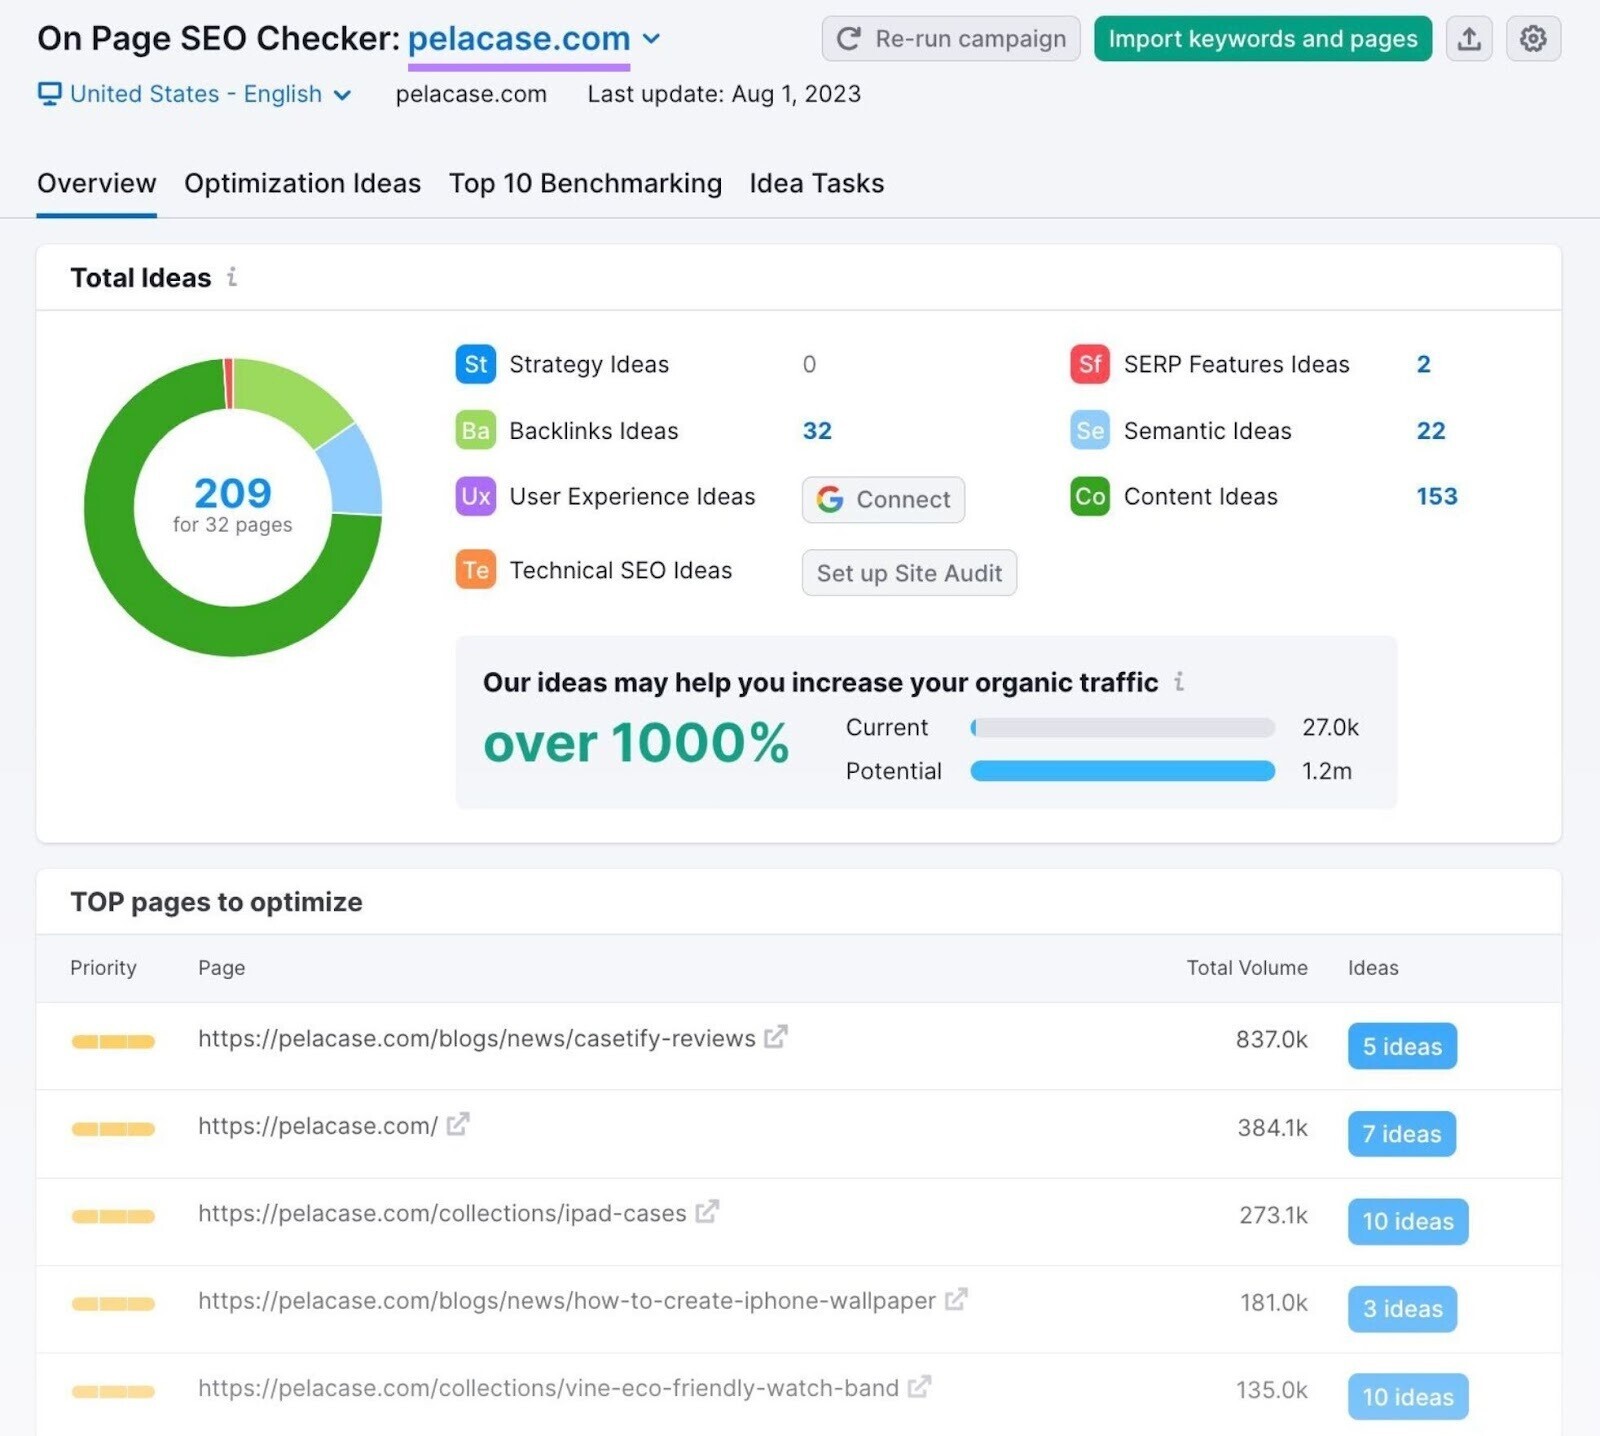 Overview dashboard in On Page SEO Checker